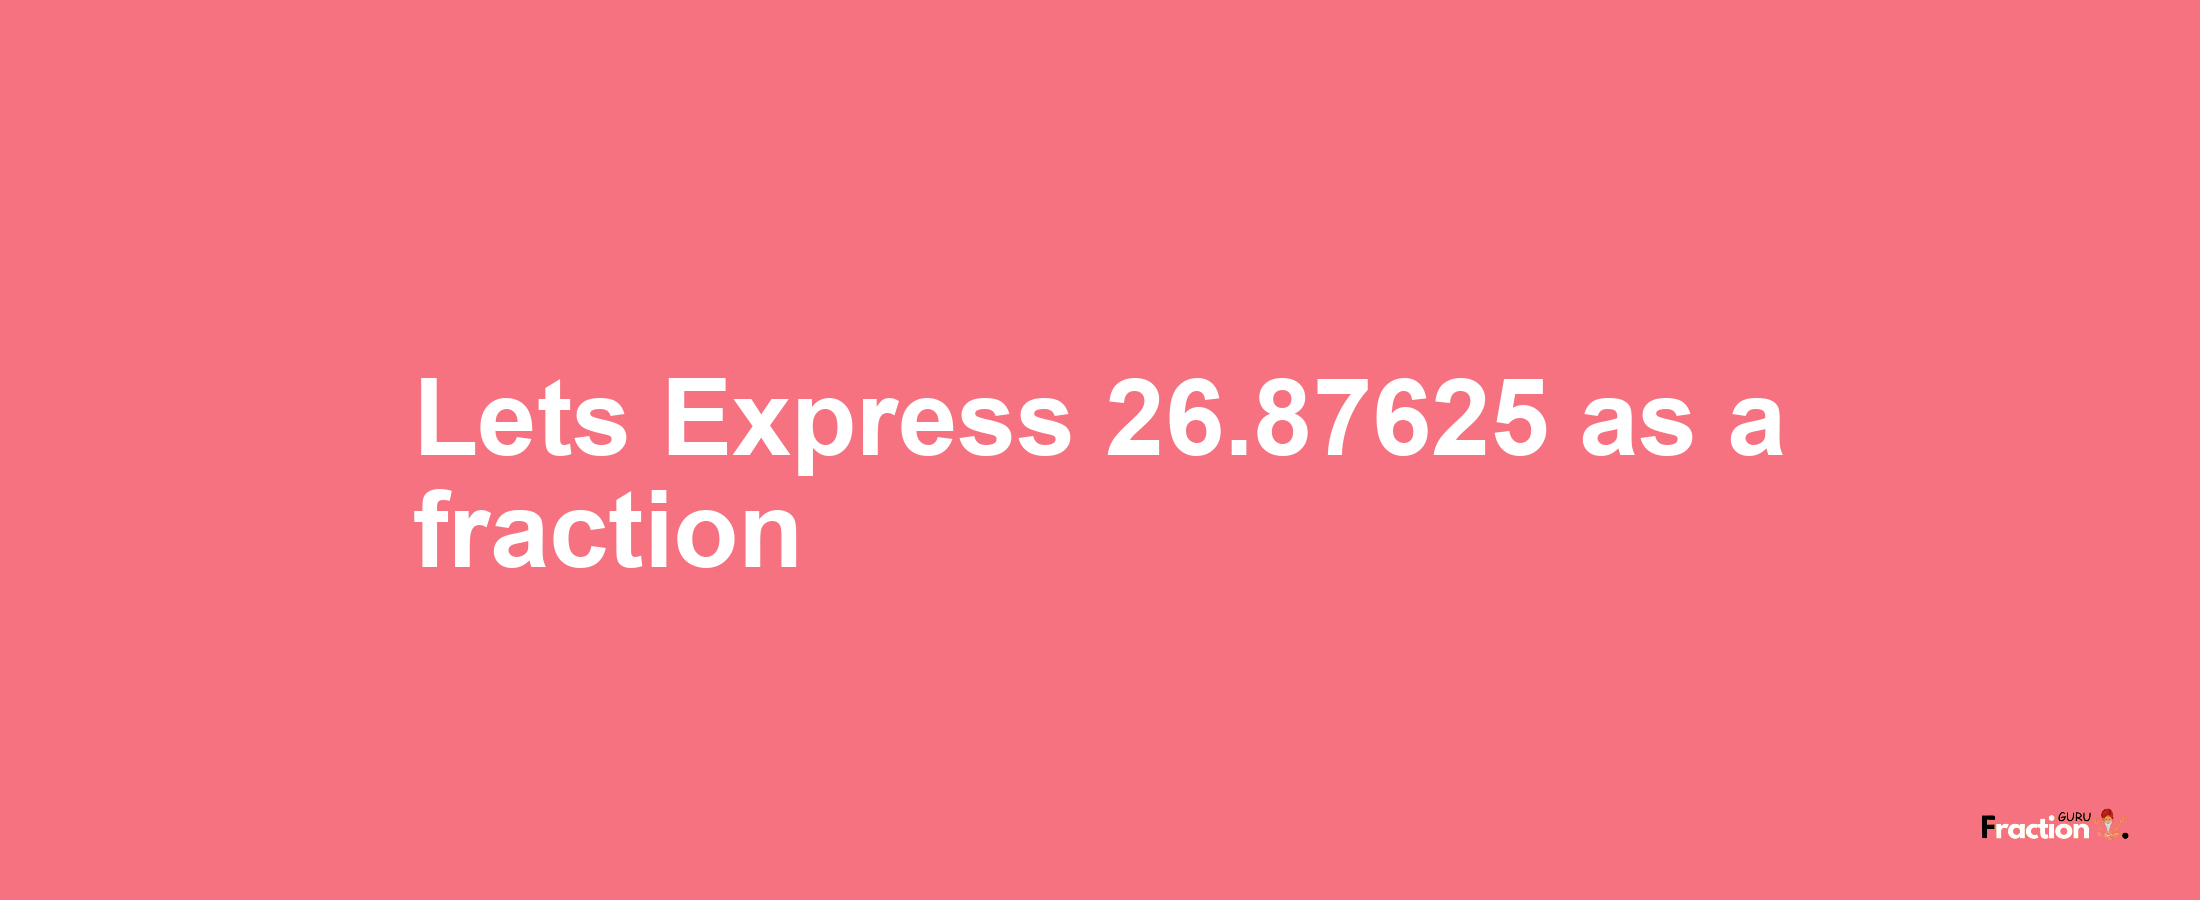 Lets Express 26.87625 as afraction